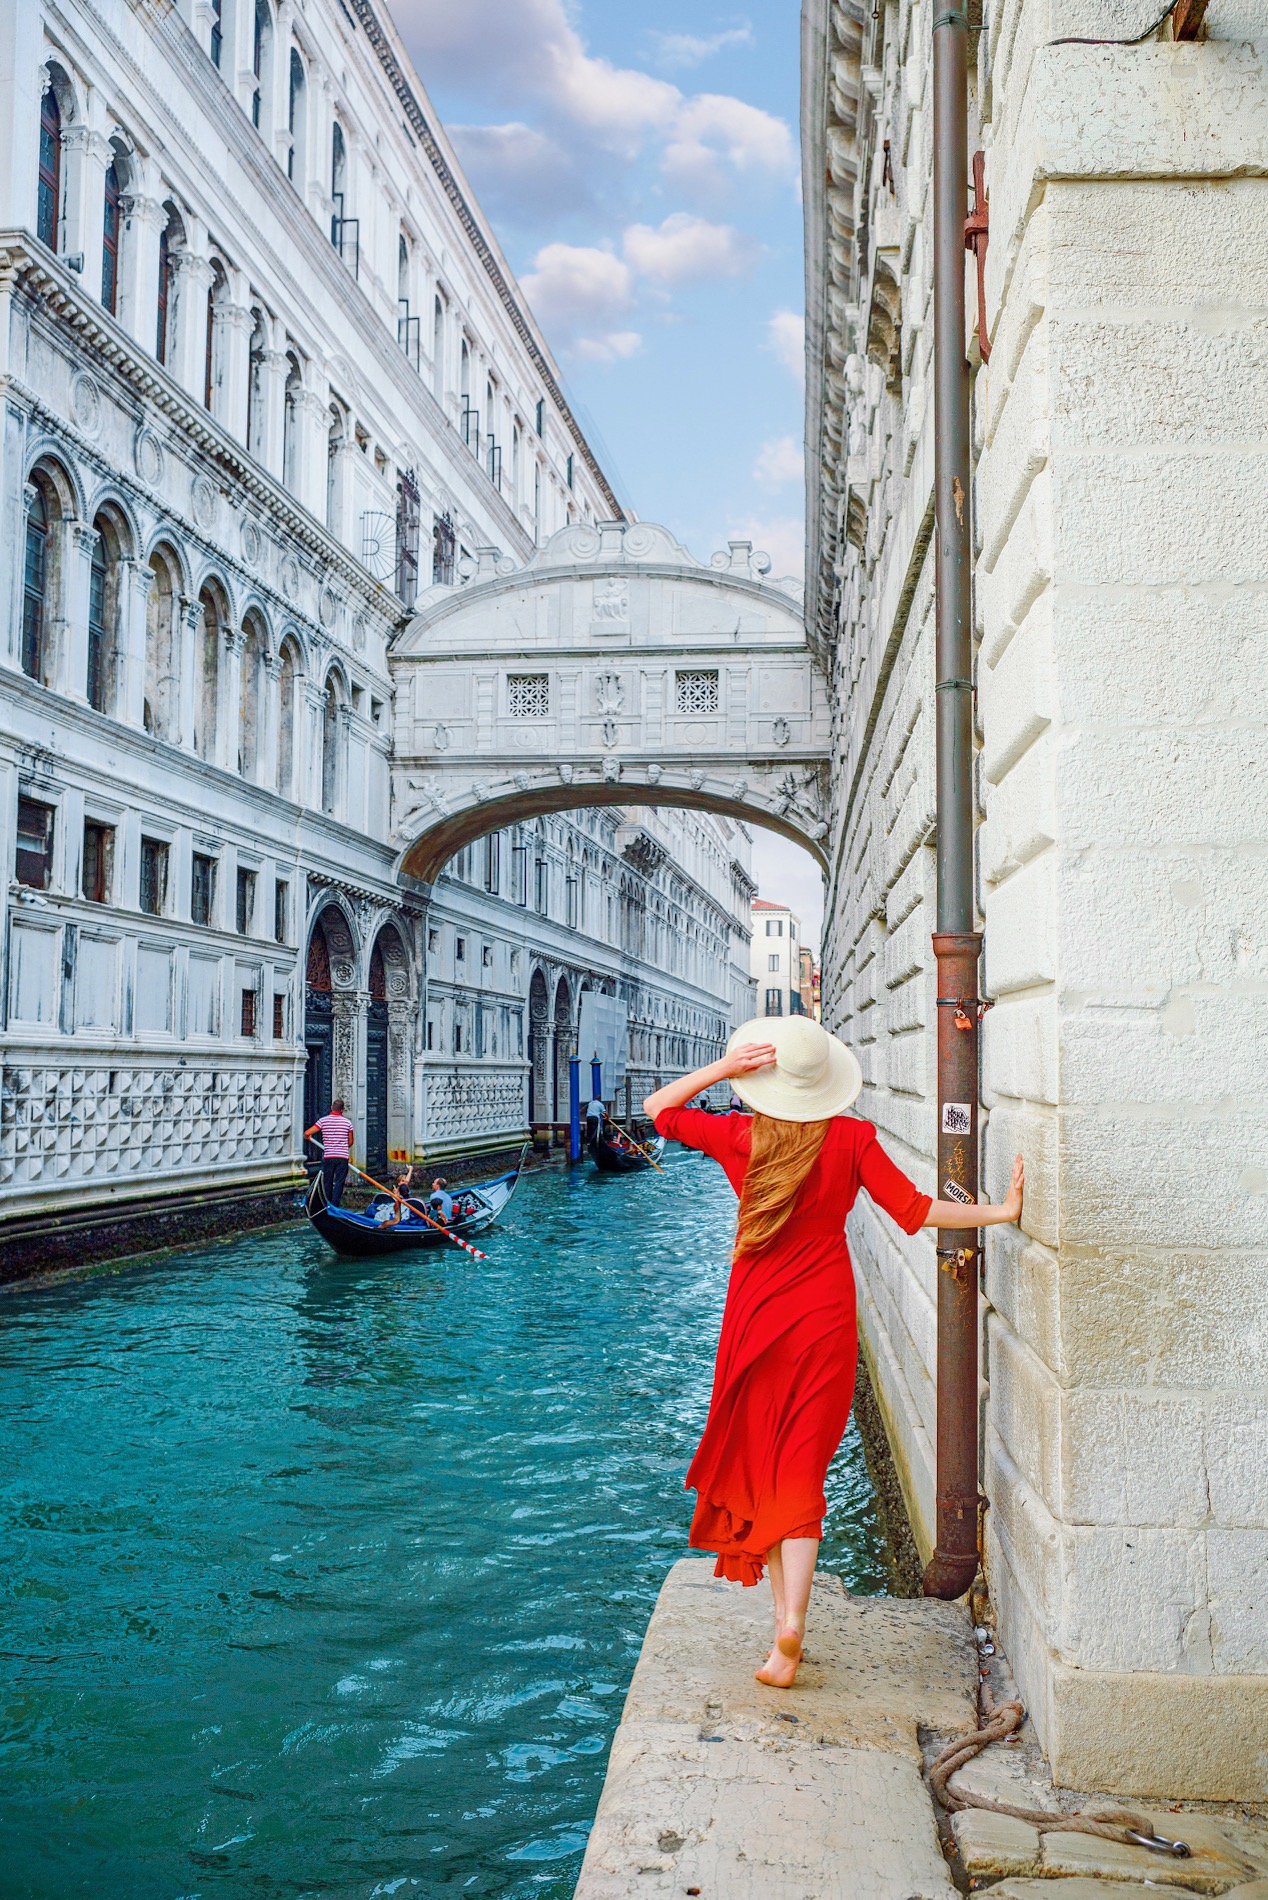 Woman in a red dress and sun hat stands looking at the Bridge of Sighs in Venice during 10 days in Italy.